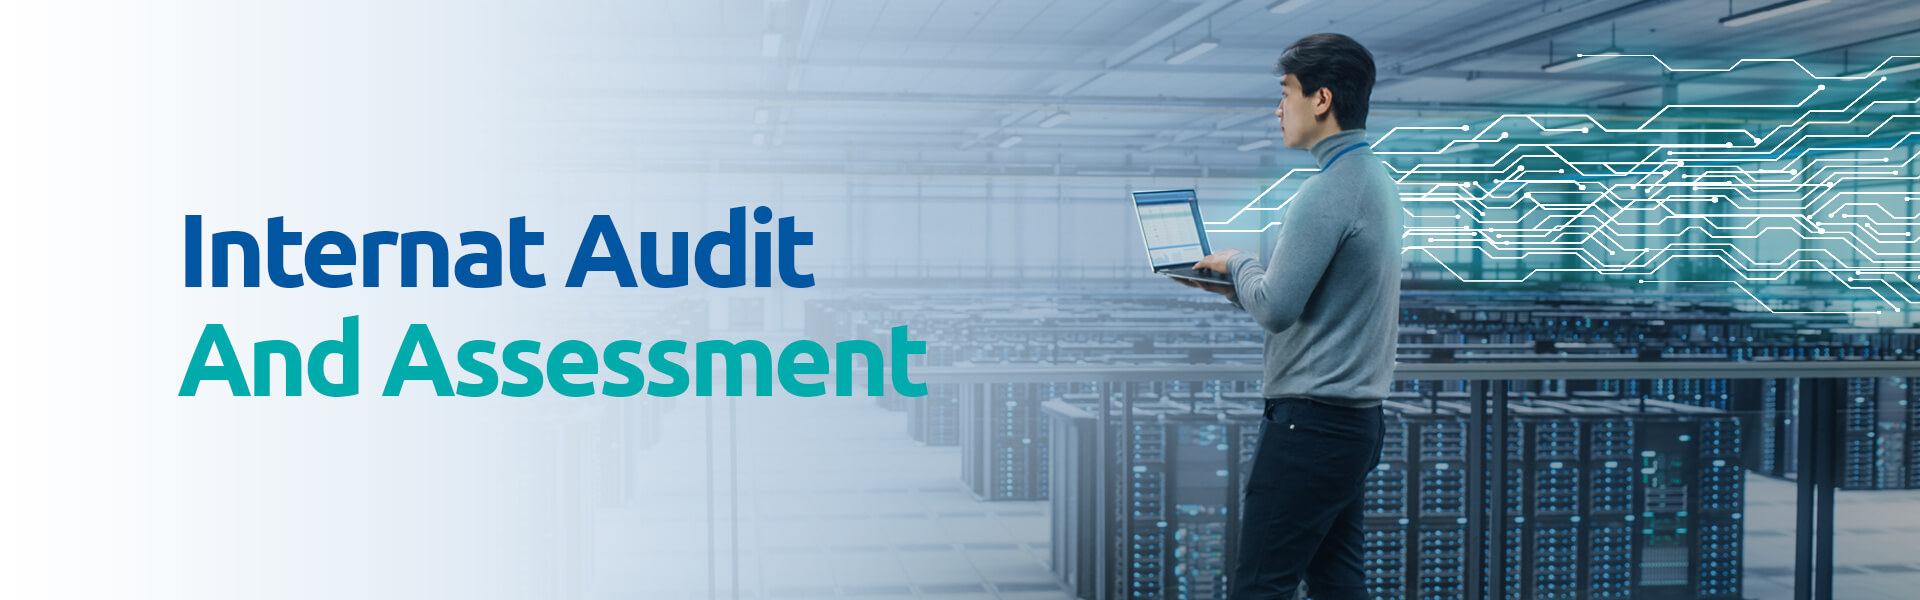 Internal Audit and Assessment by SECOM